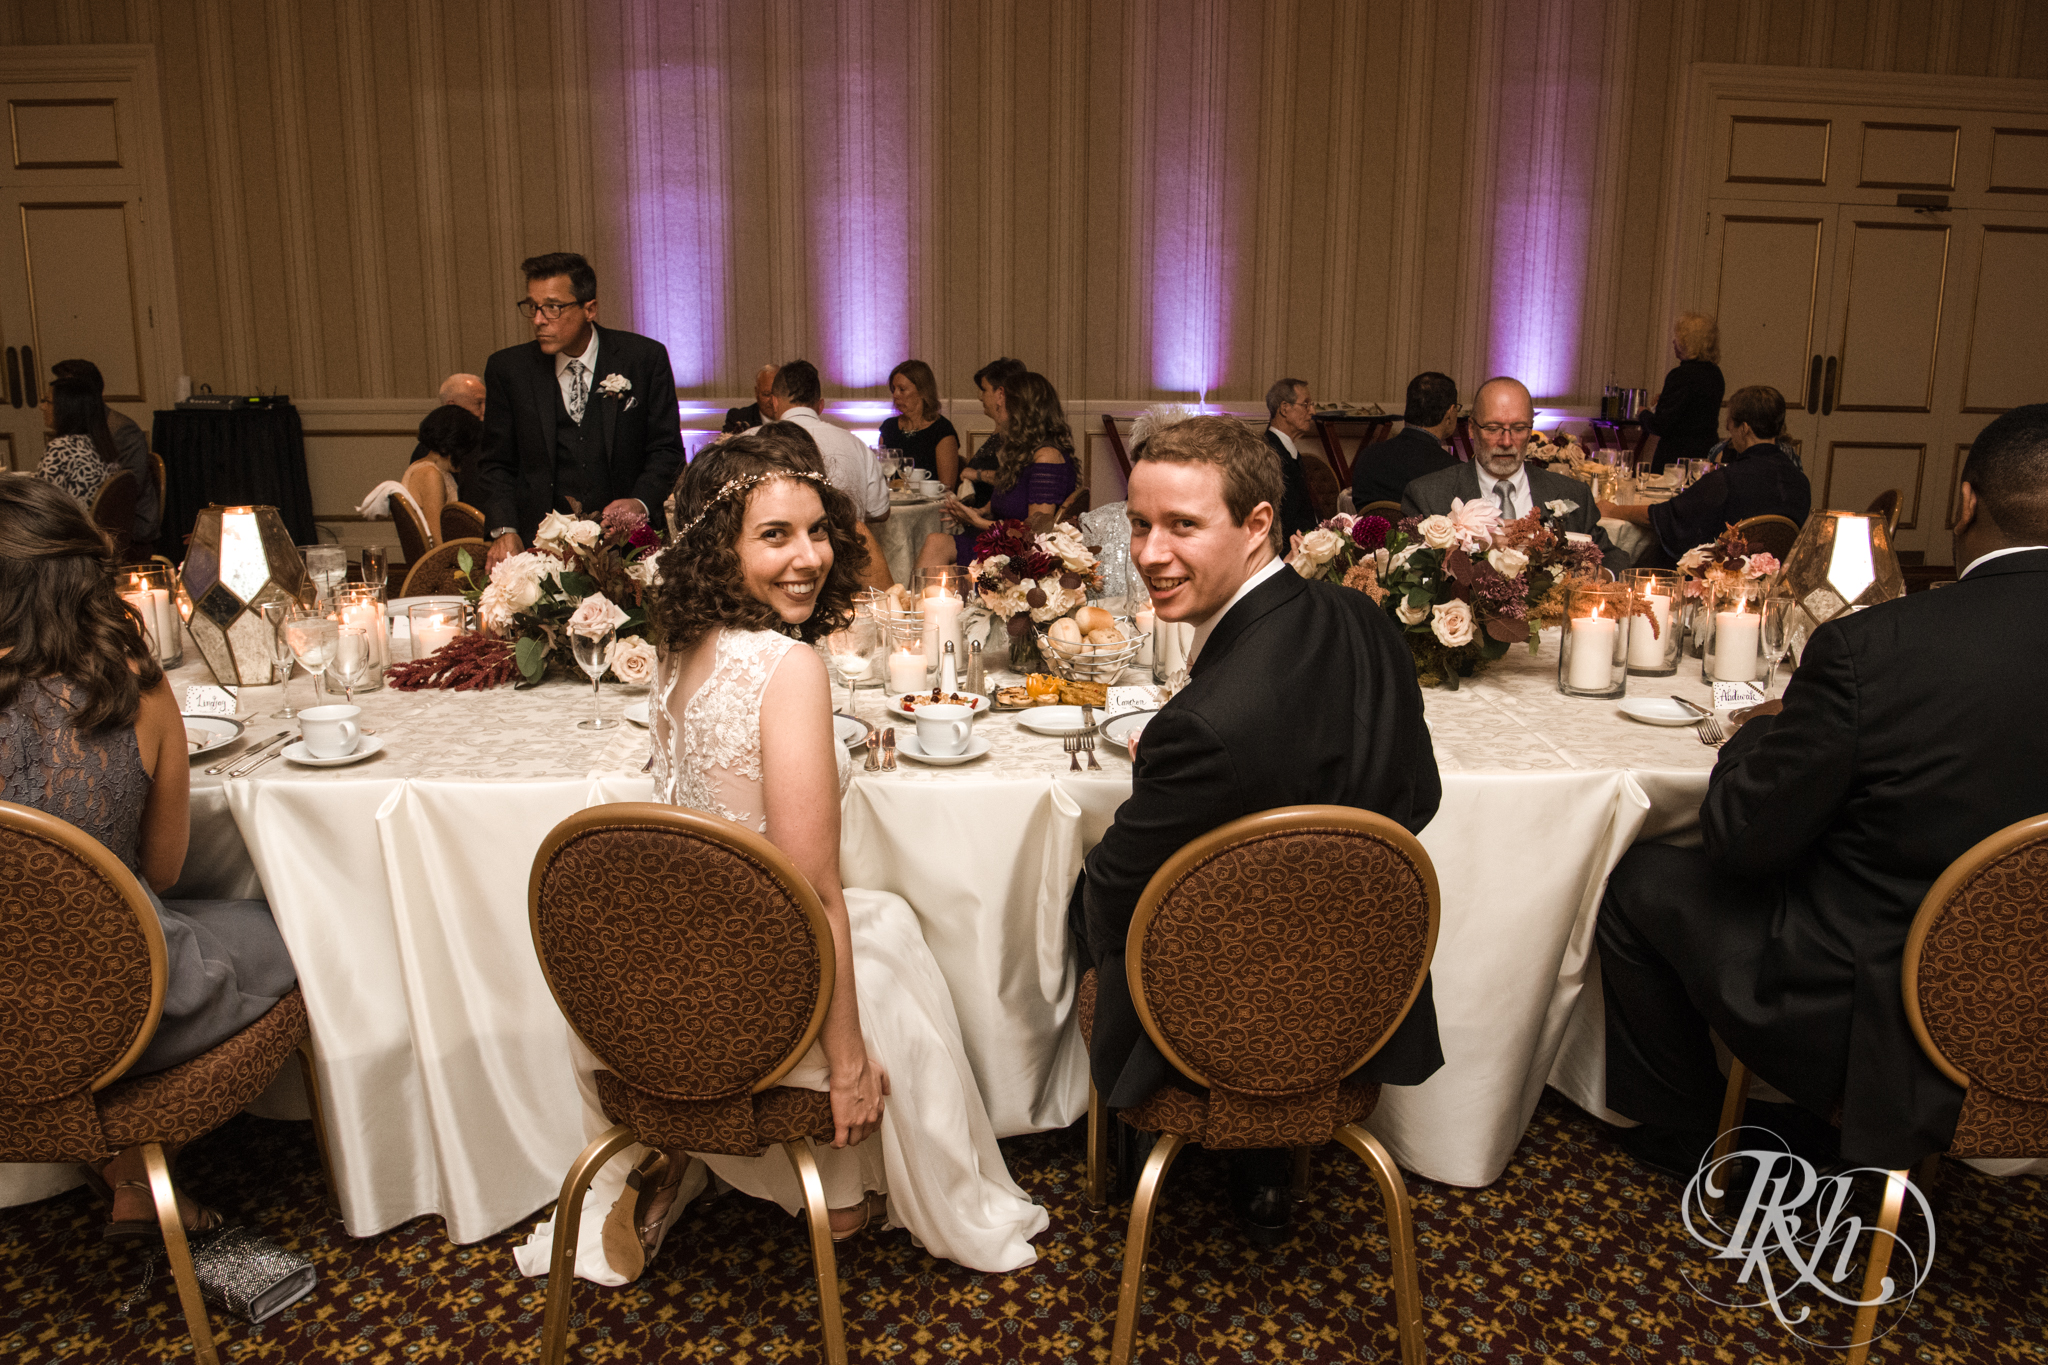 Bride and groom smile during wedding reception at the Saint Paul Hotel in Saint Paul, Minnesota.